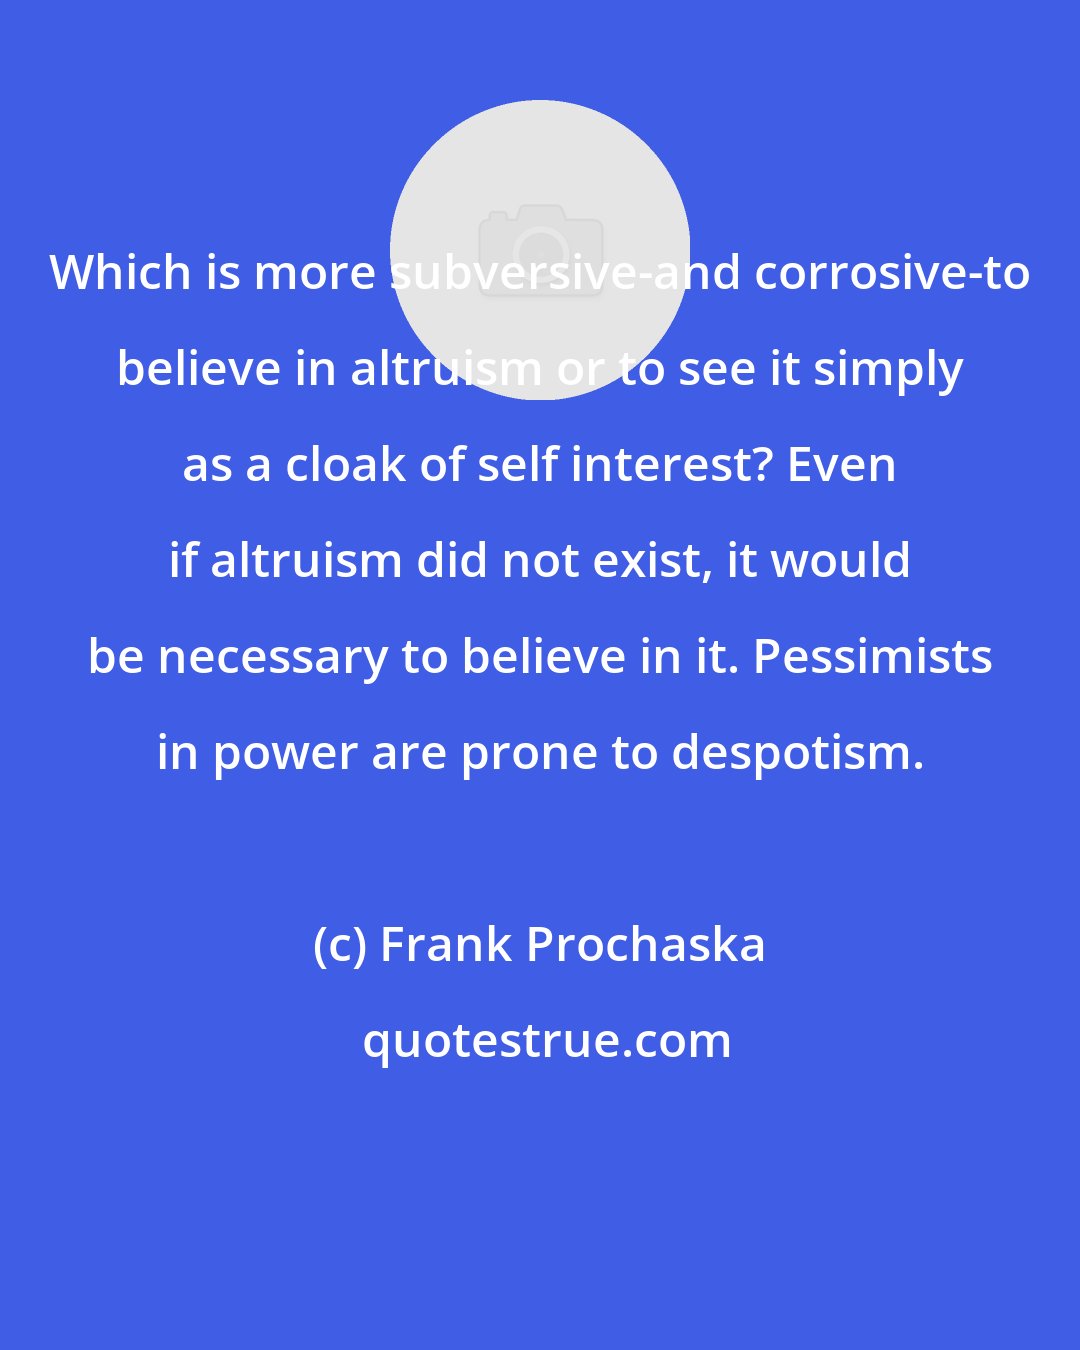 Frank Prochaska: Which is more subversive-and corrosive-to believe in altruism or to see it simply as a cloak of self interest? Even if altruism did not exist, it would be necessary to believe in it. Pessimists in power are prone to despotism.